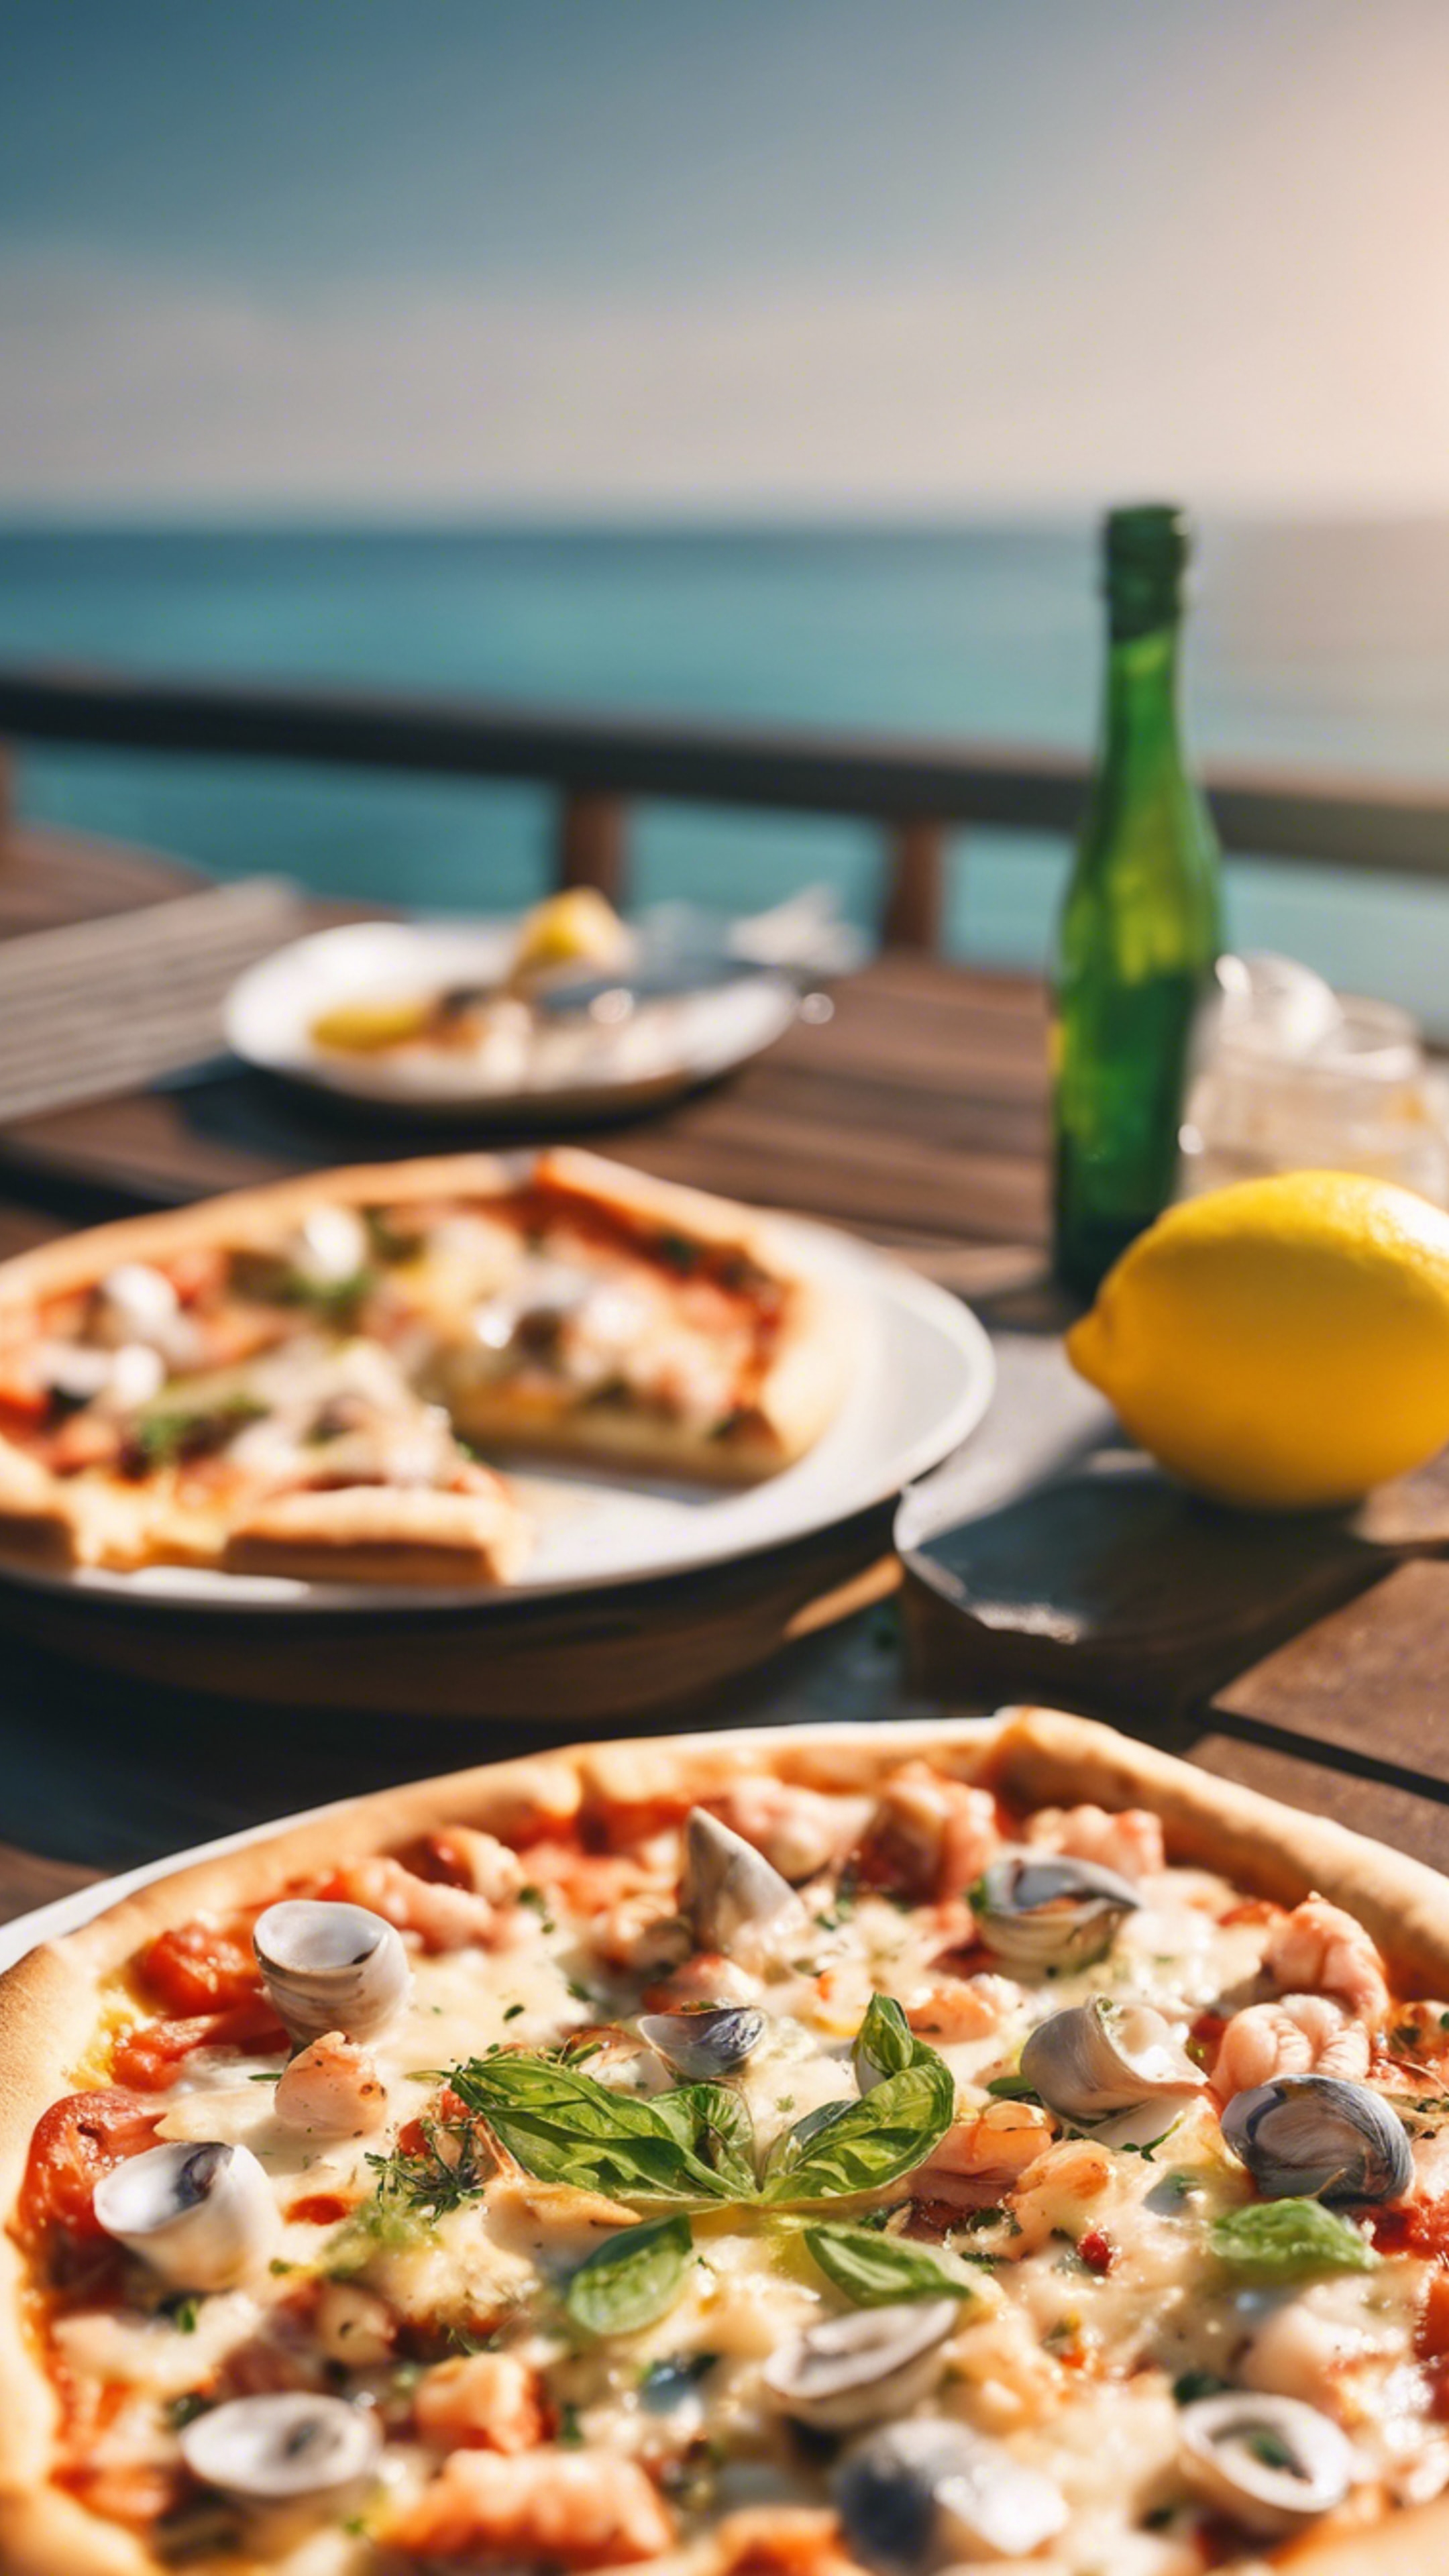 A zesty lemon and seafood pizza on a sunny seaside cafe table. Валлпапер[3a16046c2c4041a9a353]